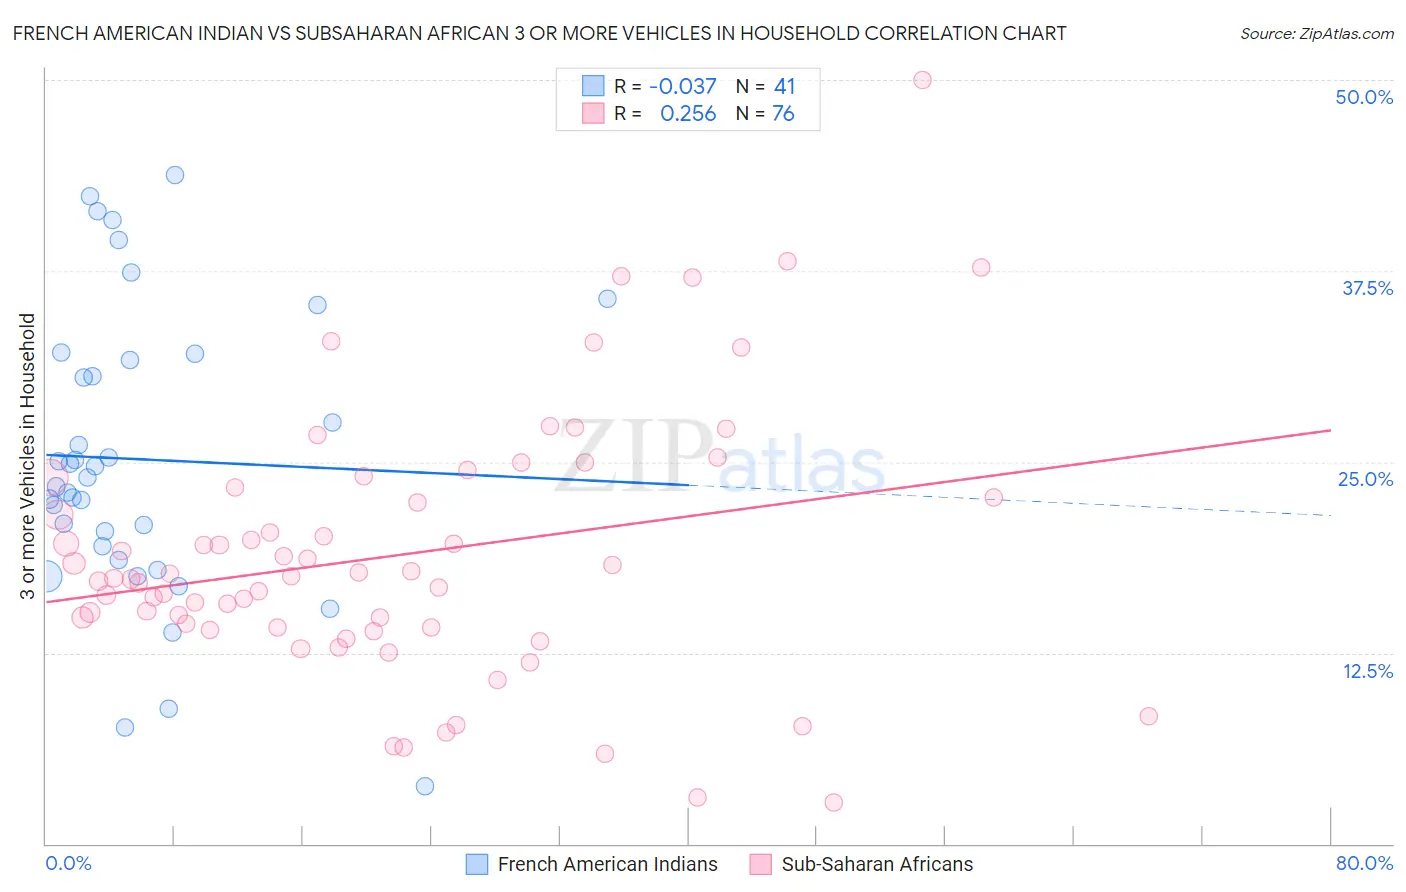 French American Indian vs Subsaharan African 3 or more Vehicles in Household